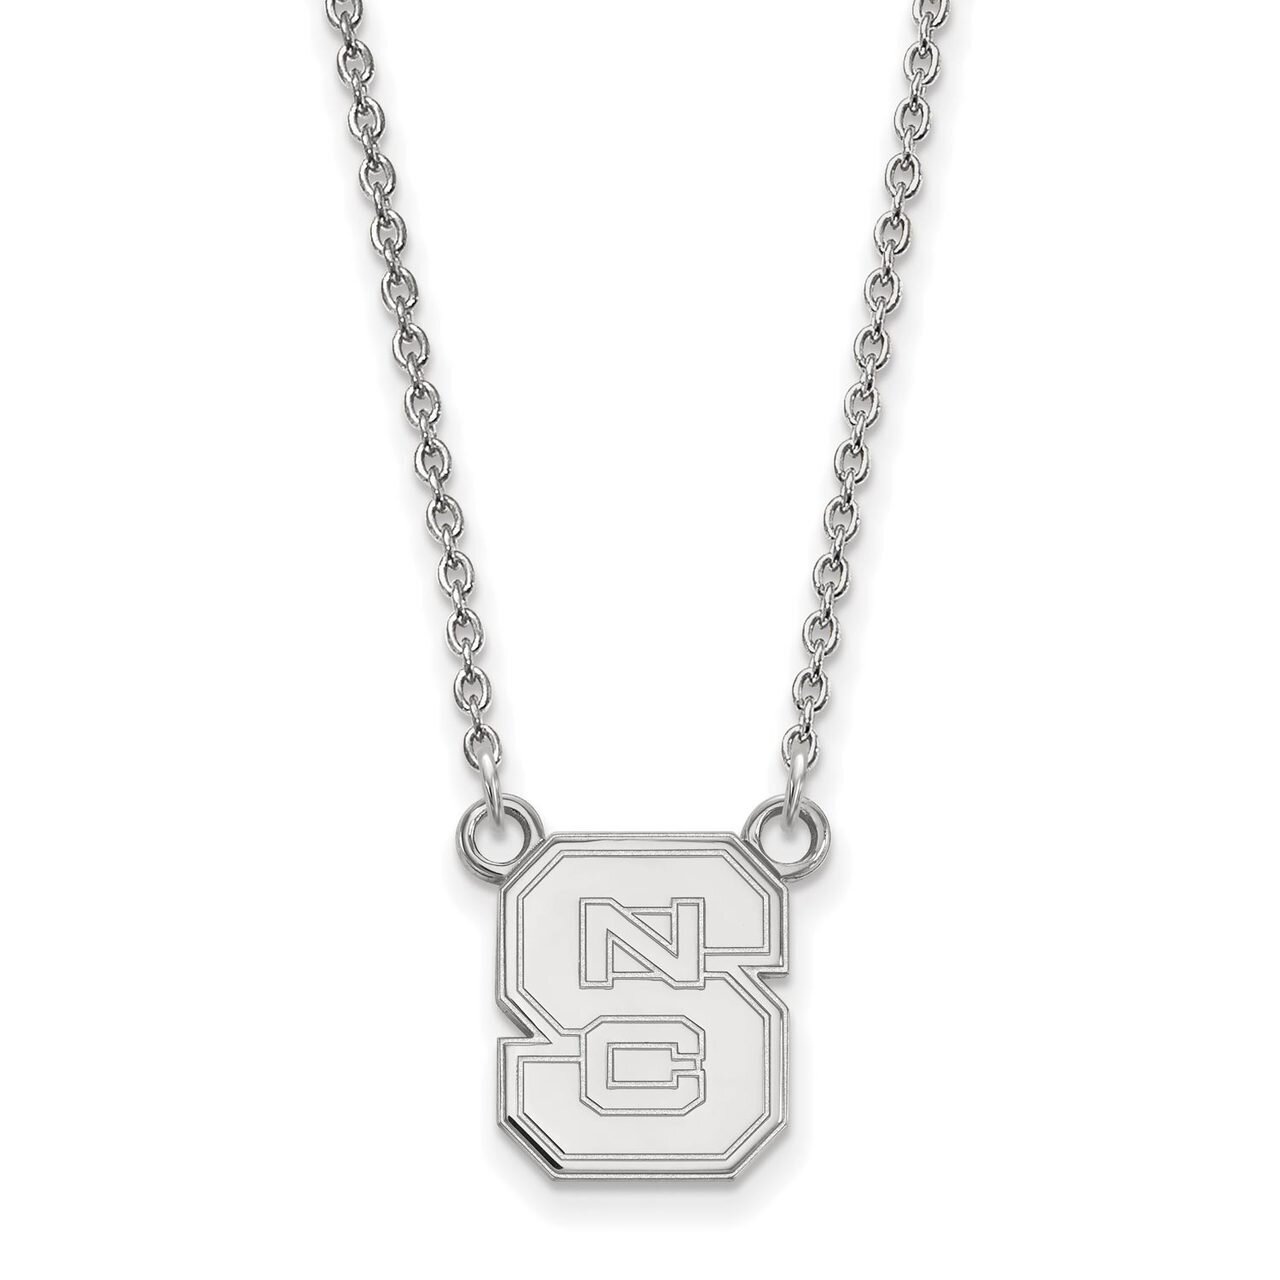 North Carolina State University Small Pendant with Chain Necklace 14k White Gold 4W015NCS-18